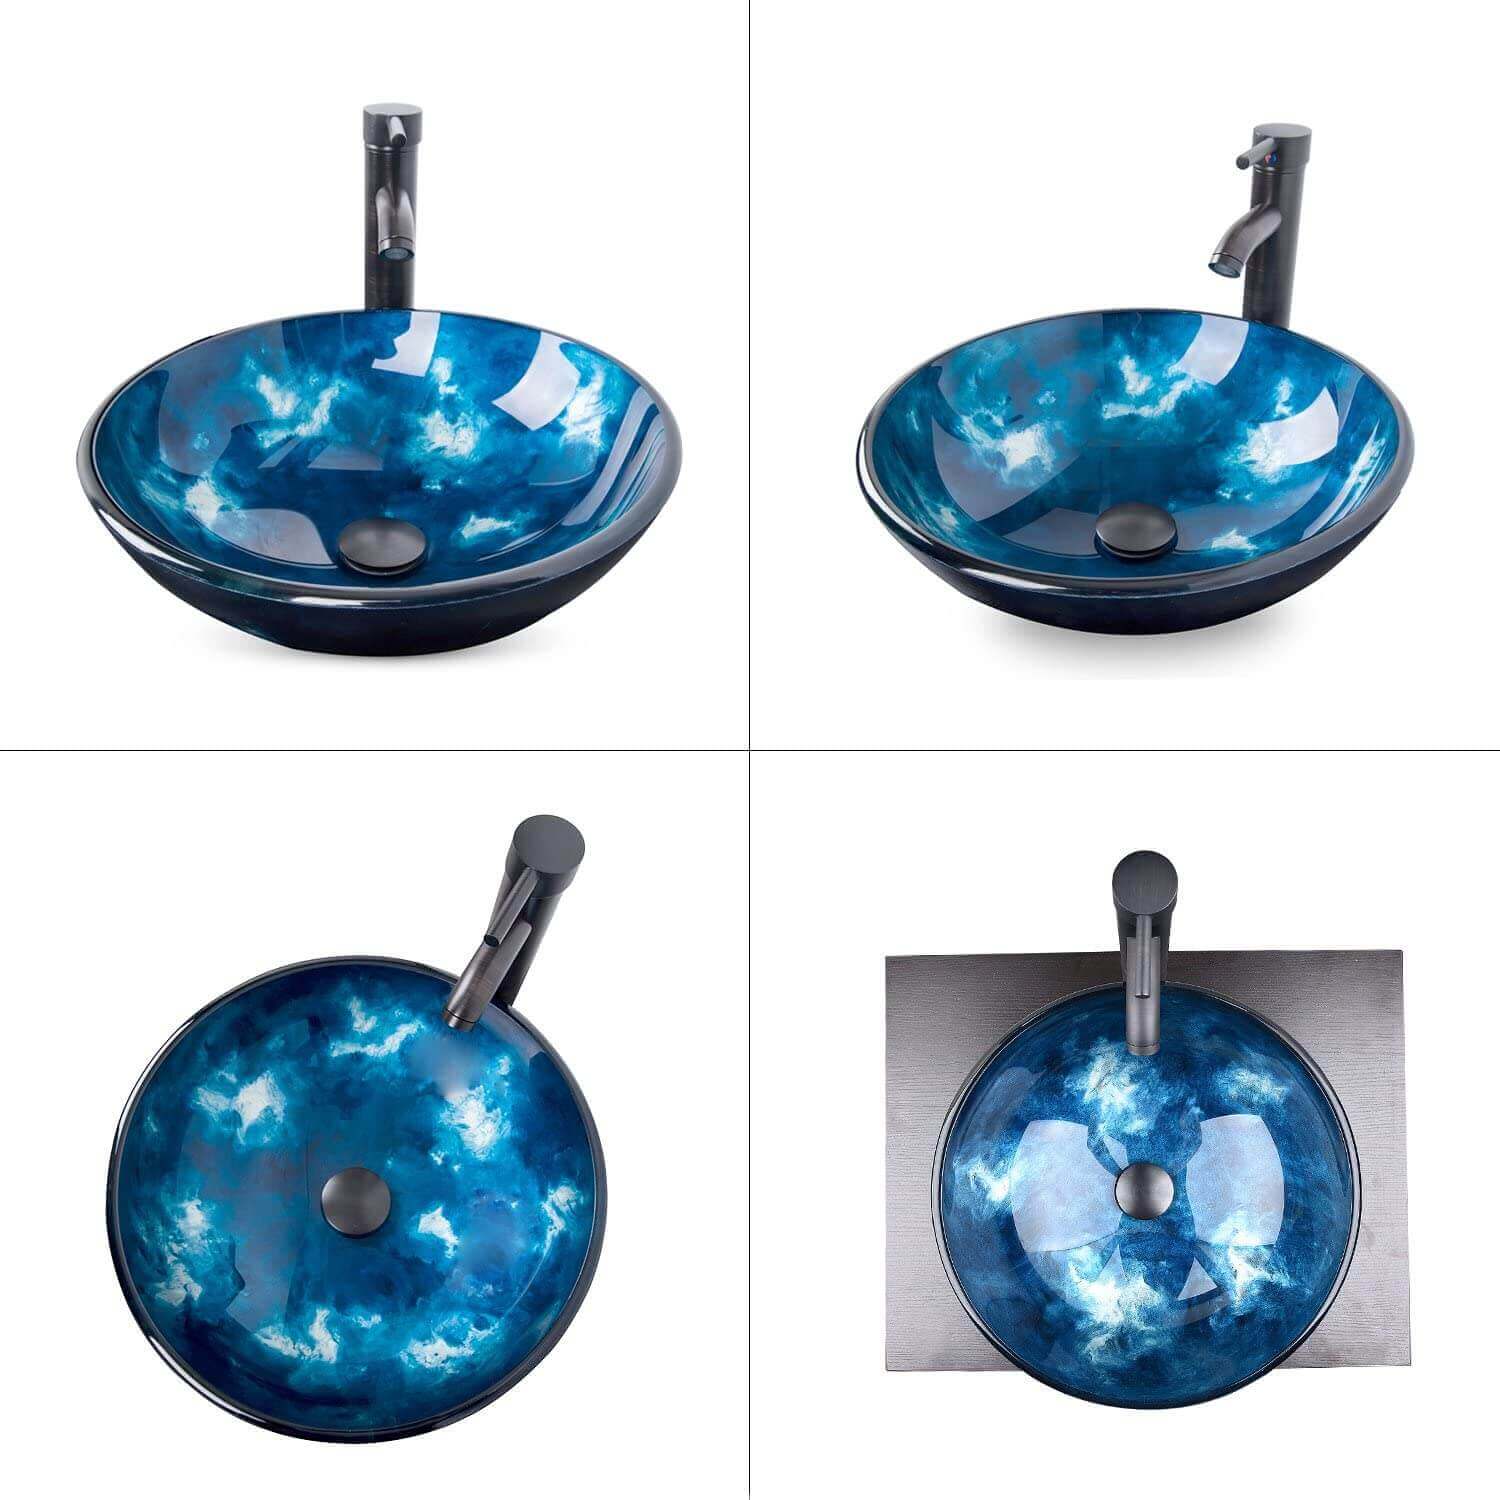 4 Angles of blue glass sink